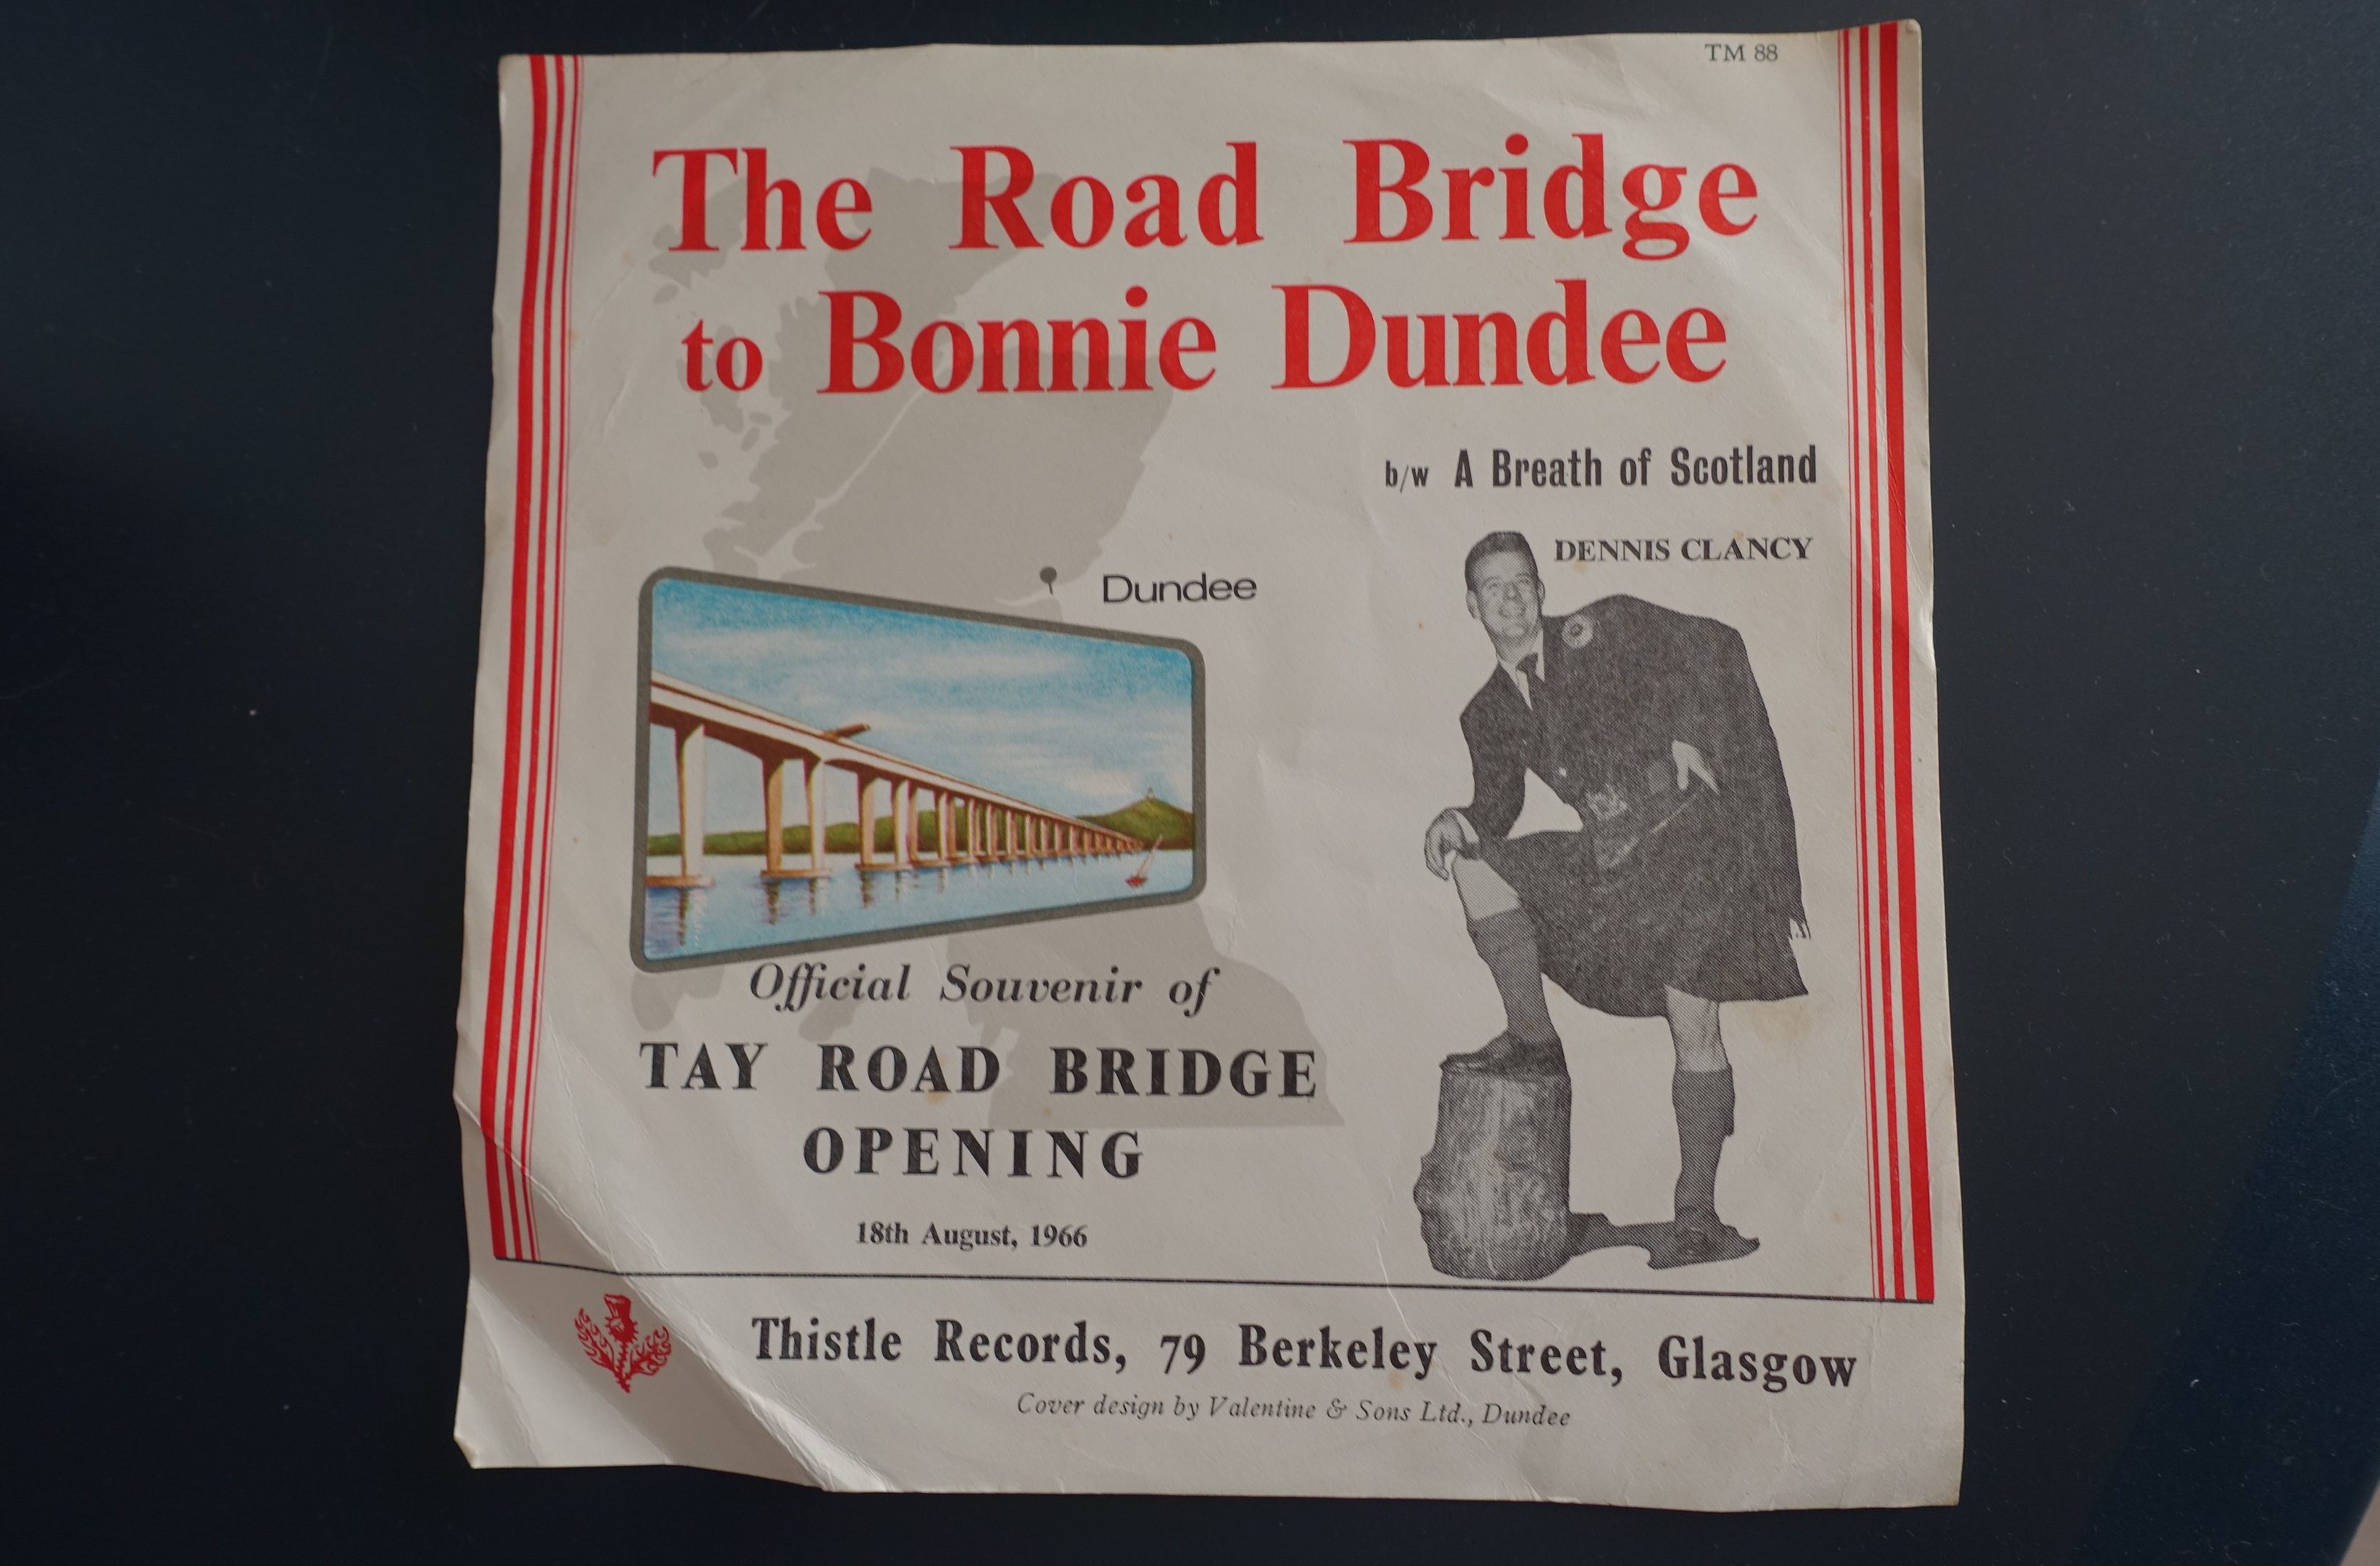 The Road Bridge to Bonnie Dundee was written to commemorate the opening of the Tay Road Bridge on August 18, 1966